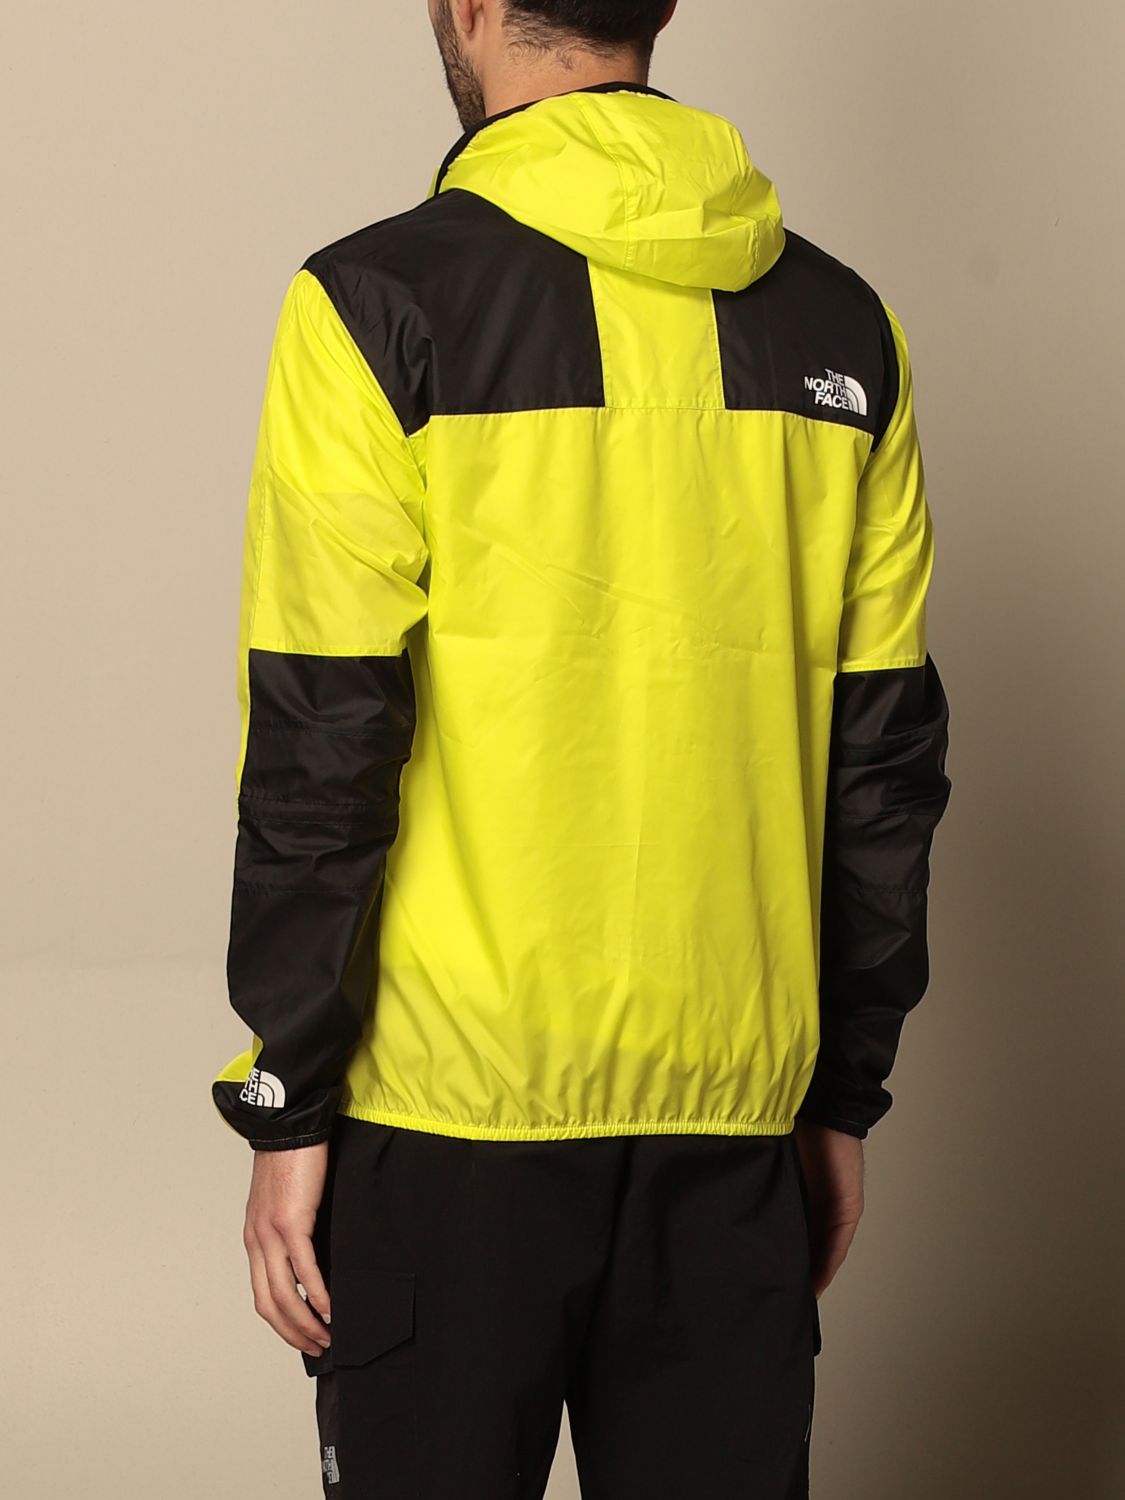 THE NORTH FACE: jacket for man - Yellow | The North Face jacket ...